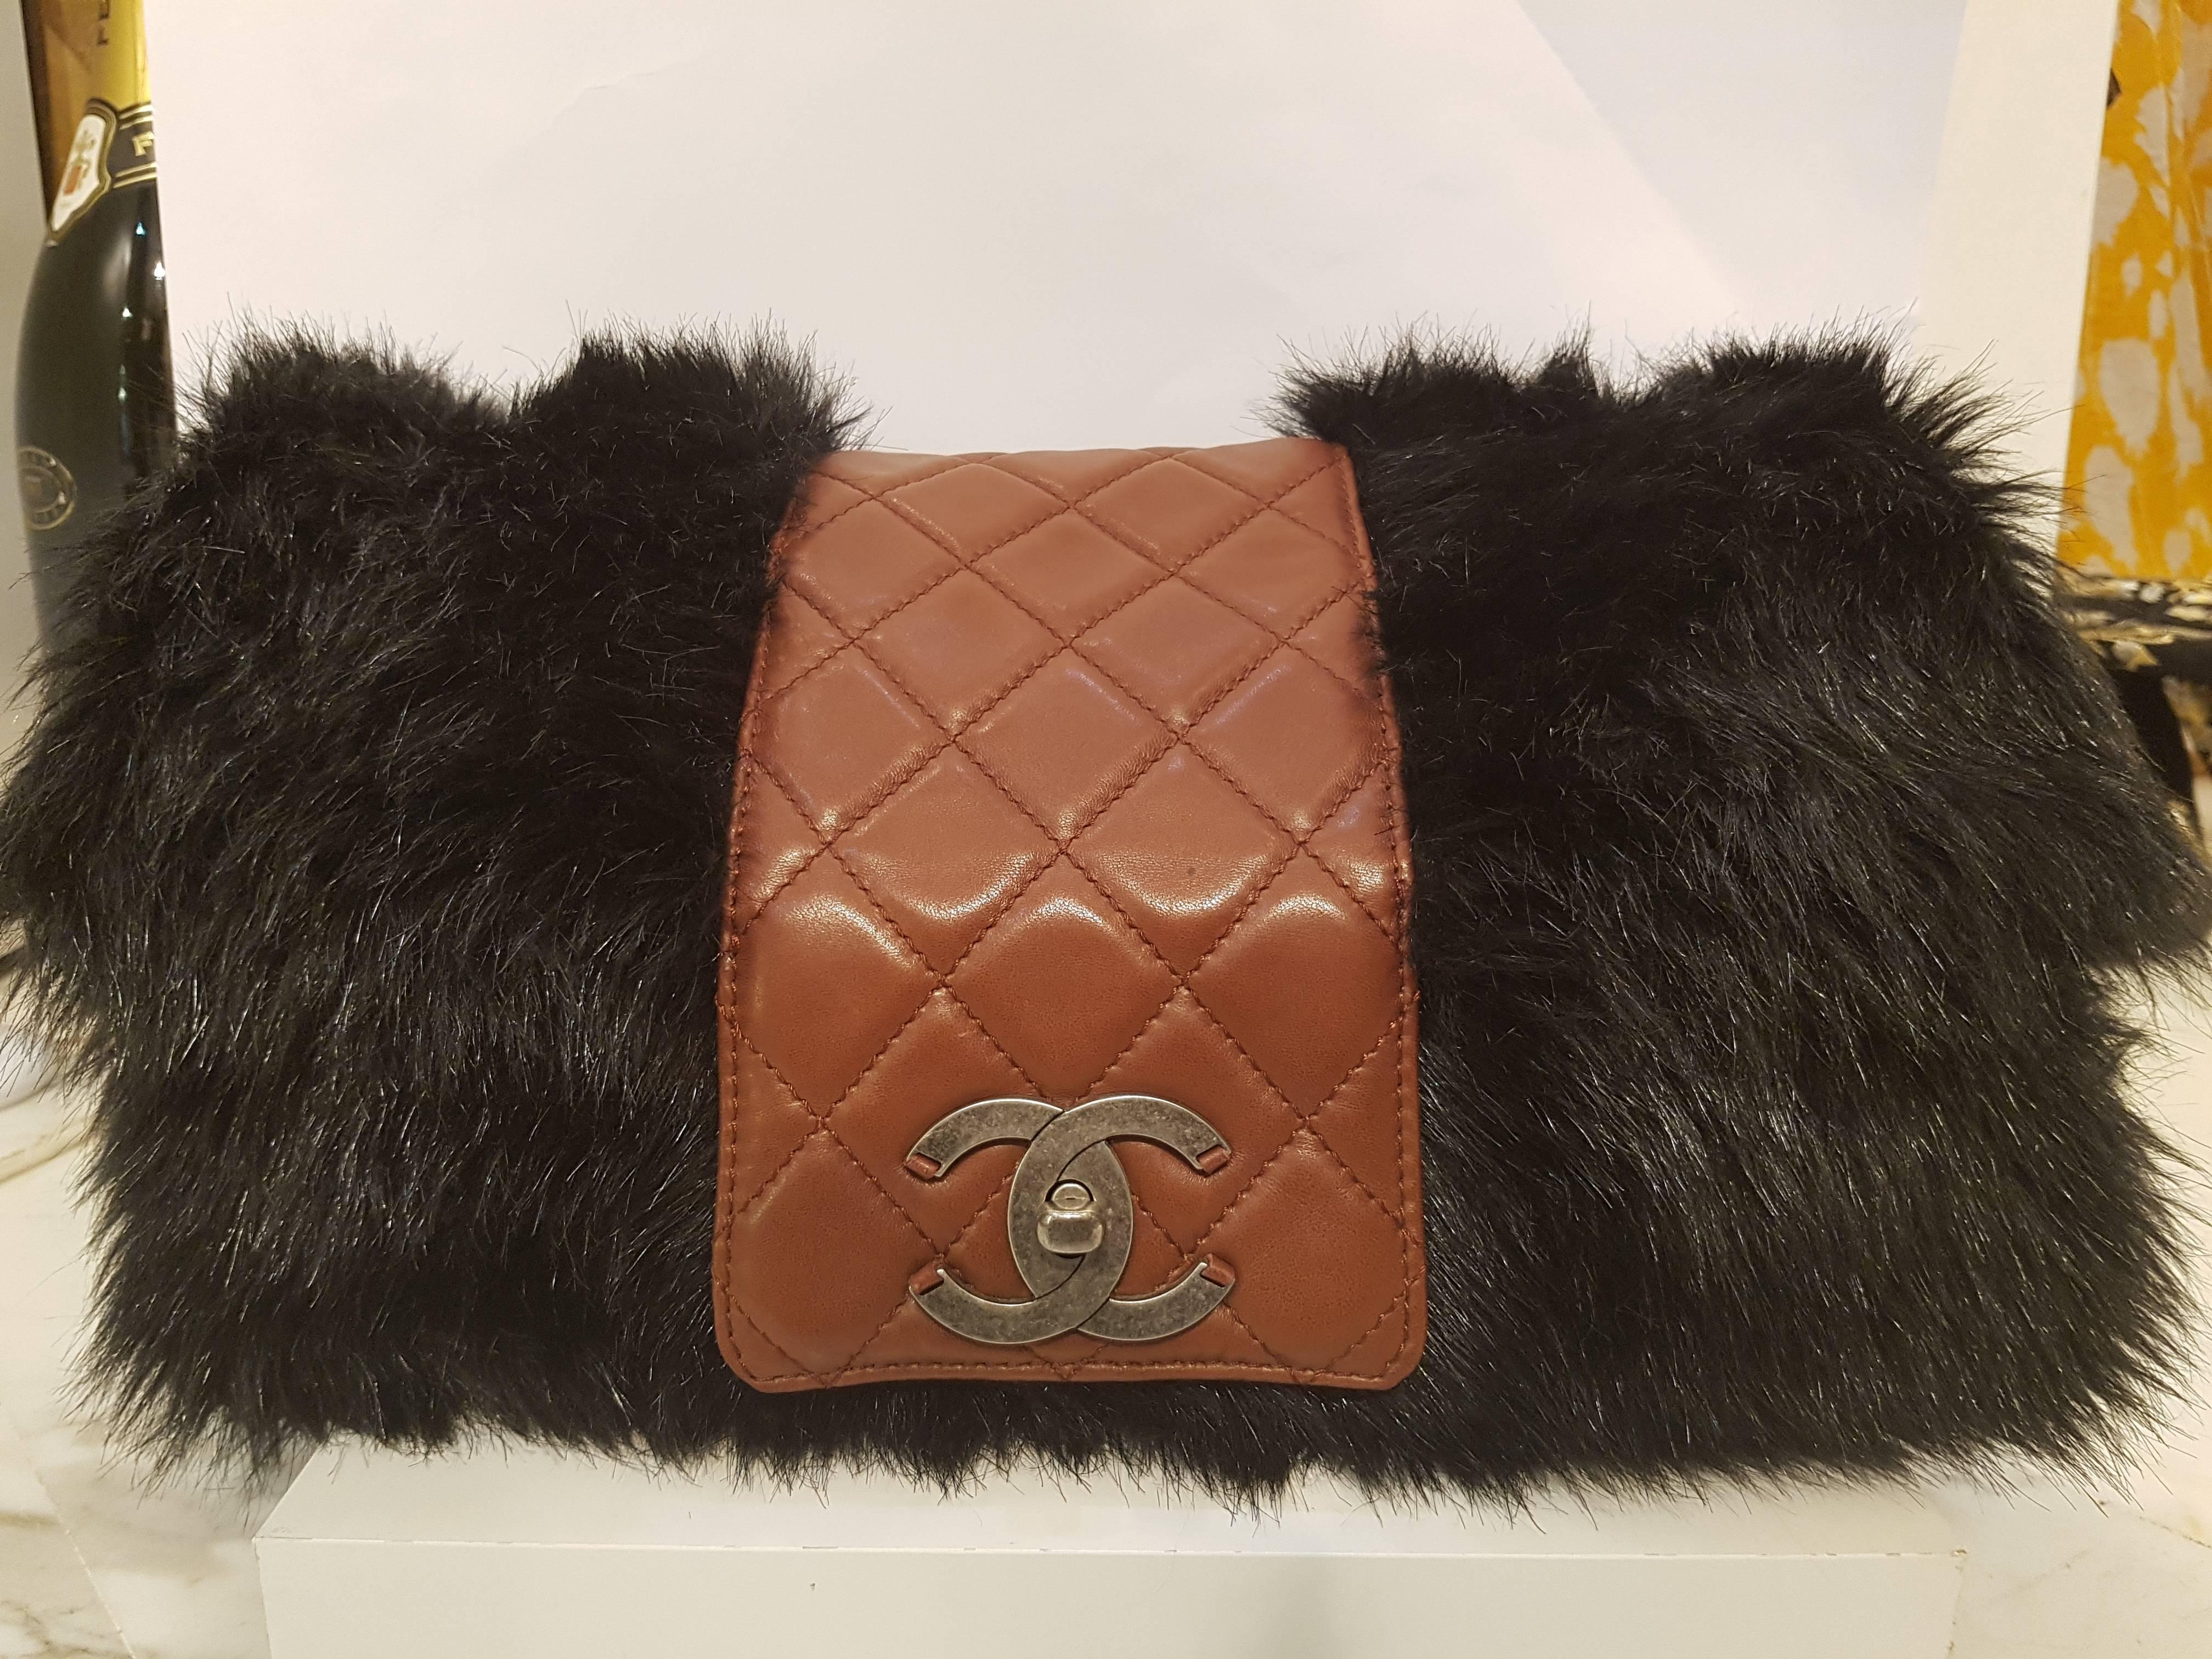 CHANEL Fantasy Fur Arctic Flap 
This stylish flap bag is beautifully crafted of black faux fur. The bag features bronze chain link shoulder straps threaded with brown leather and diamond quilted chocolate colored leather on a frontal flap with a